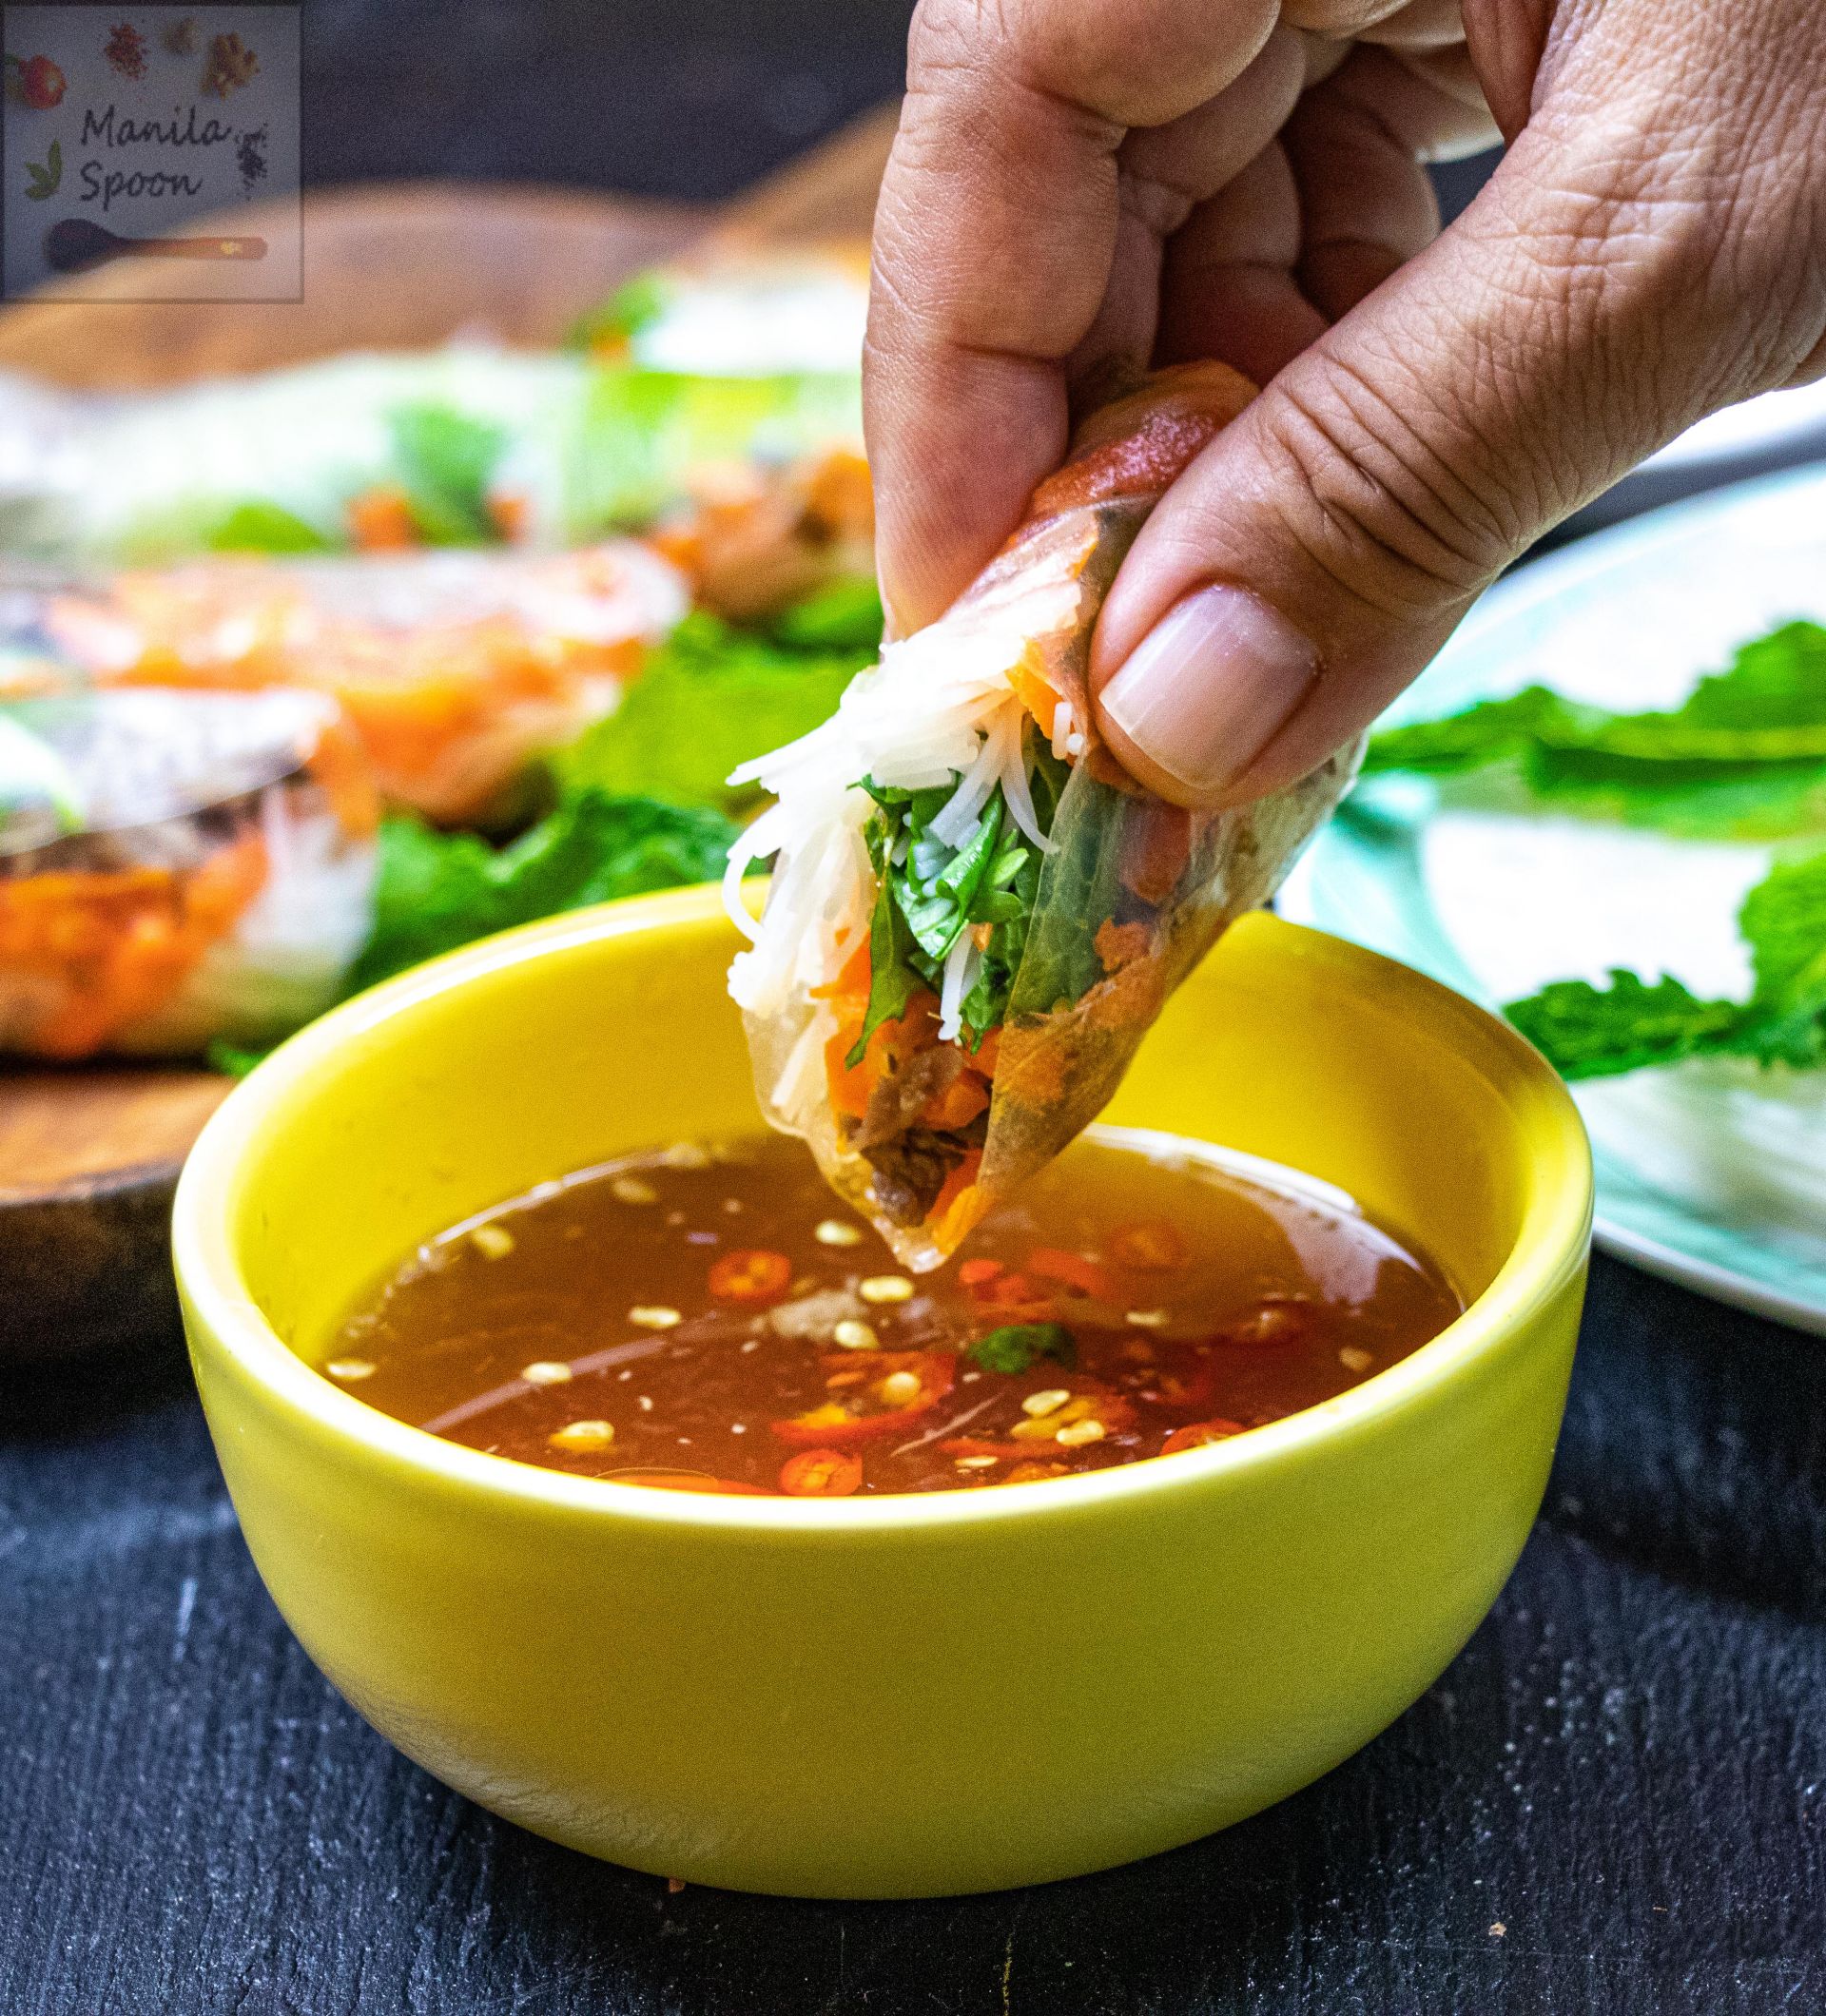 How to Wrap Spring Rolls: Both Chinese & Vietnamese! - The Woks of